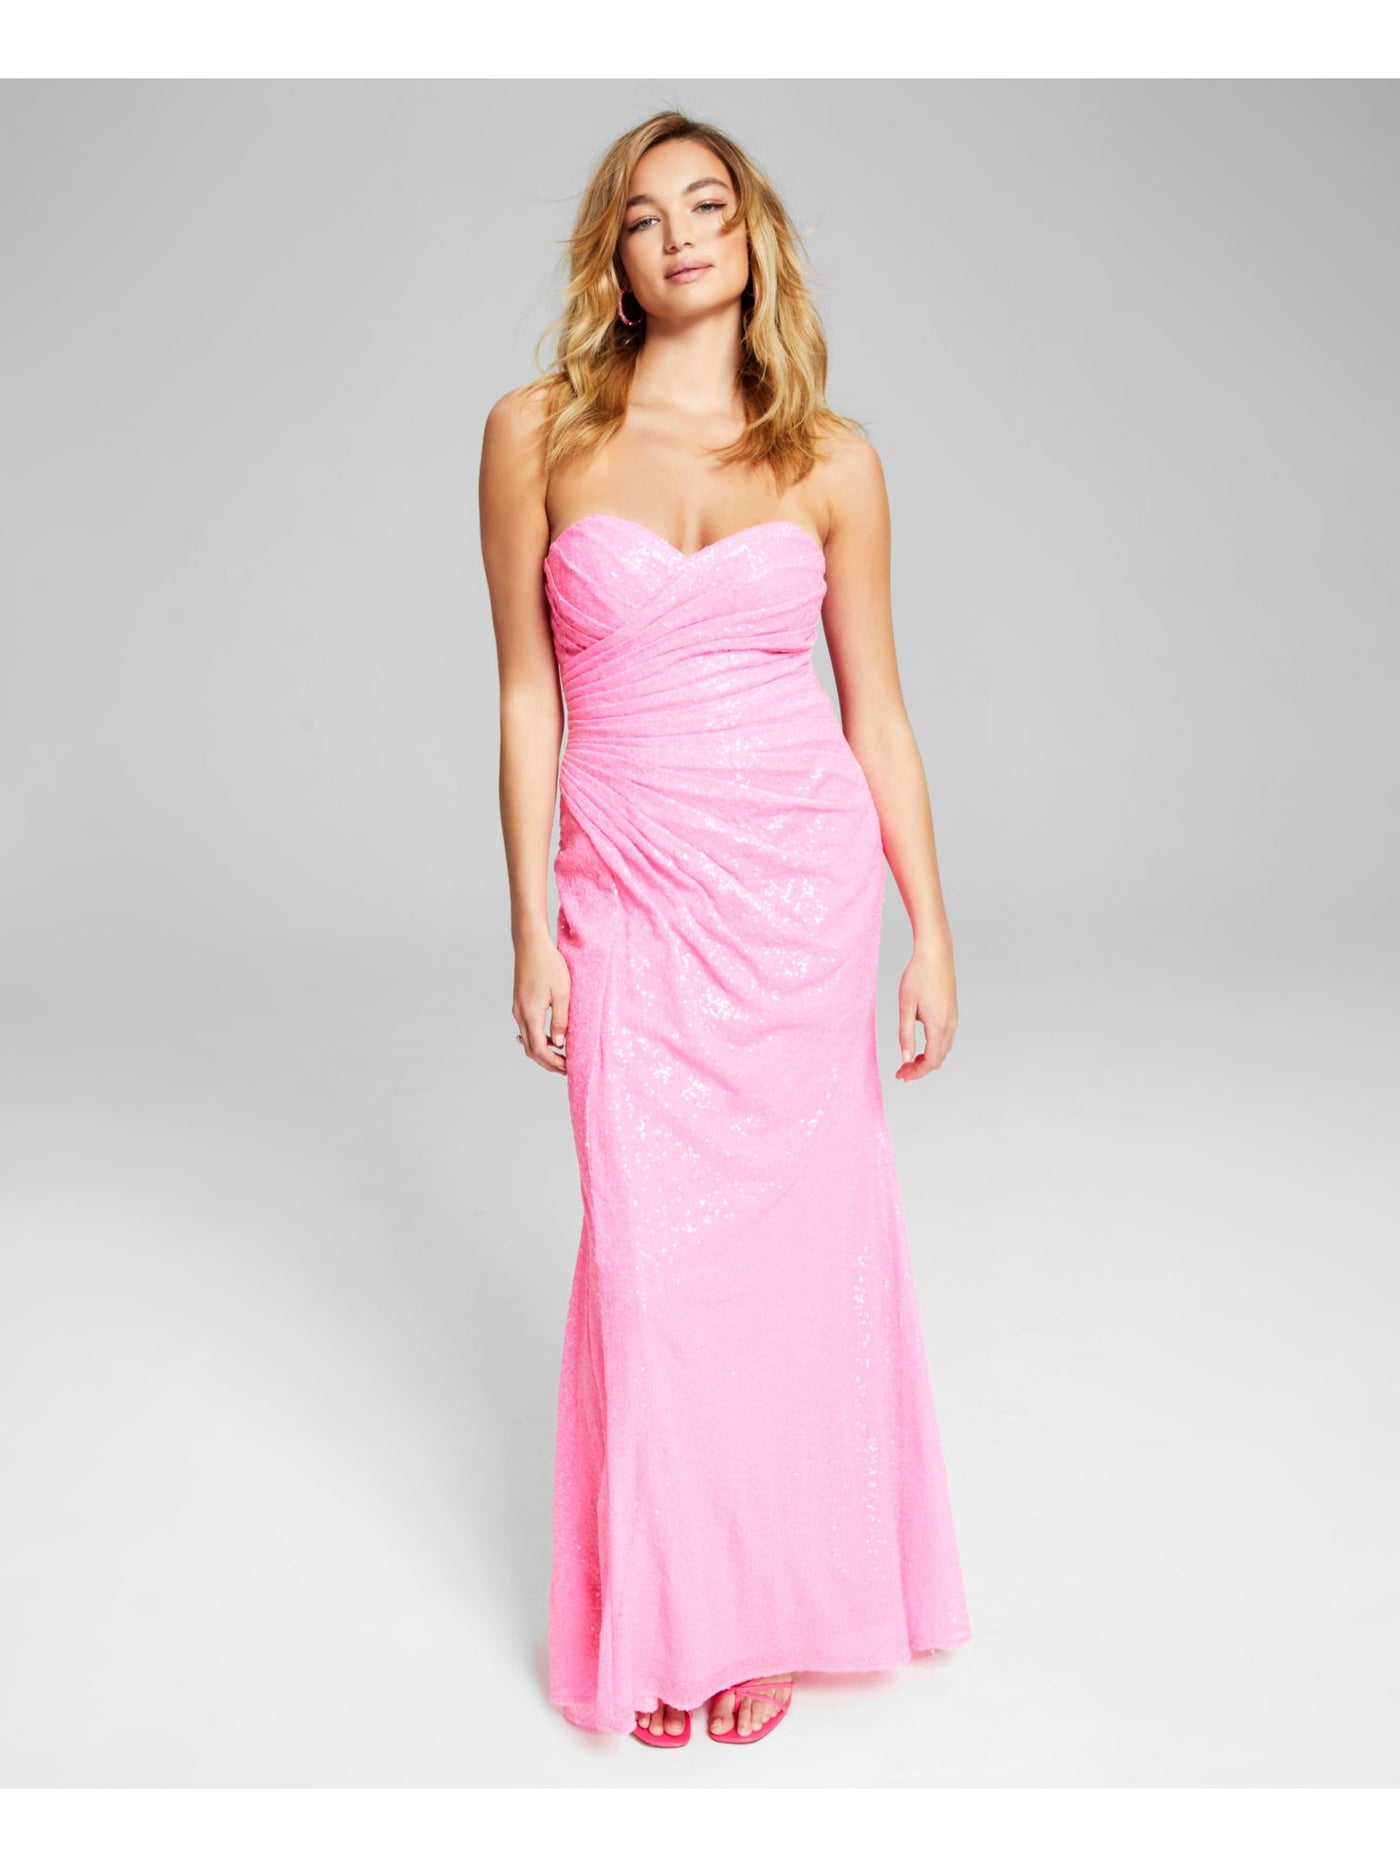 BLONDIE NITES Womens Pink Sequined Zippered Lined Sleeveless Sweetheart Neckline Full-Length Formal Gown Dress Juniors 3